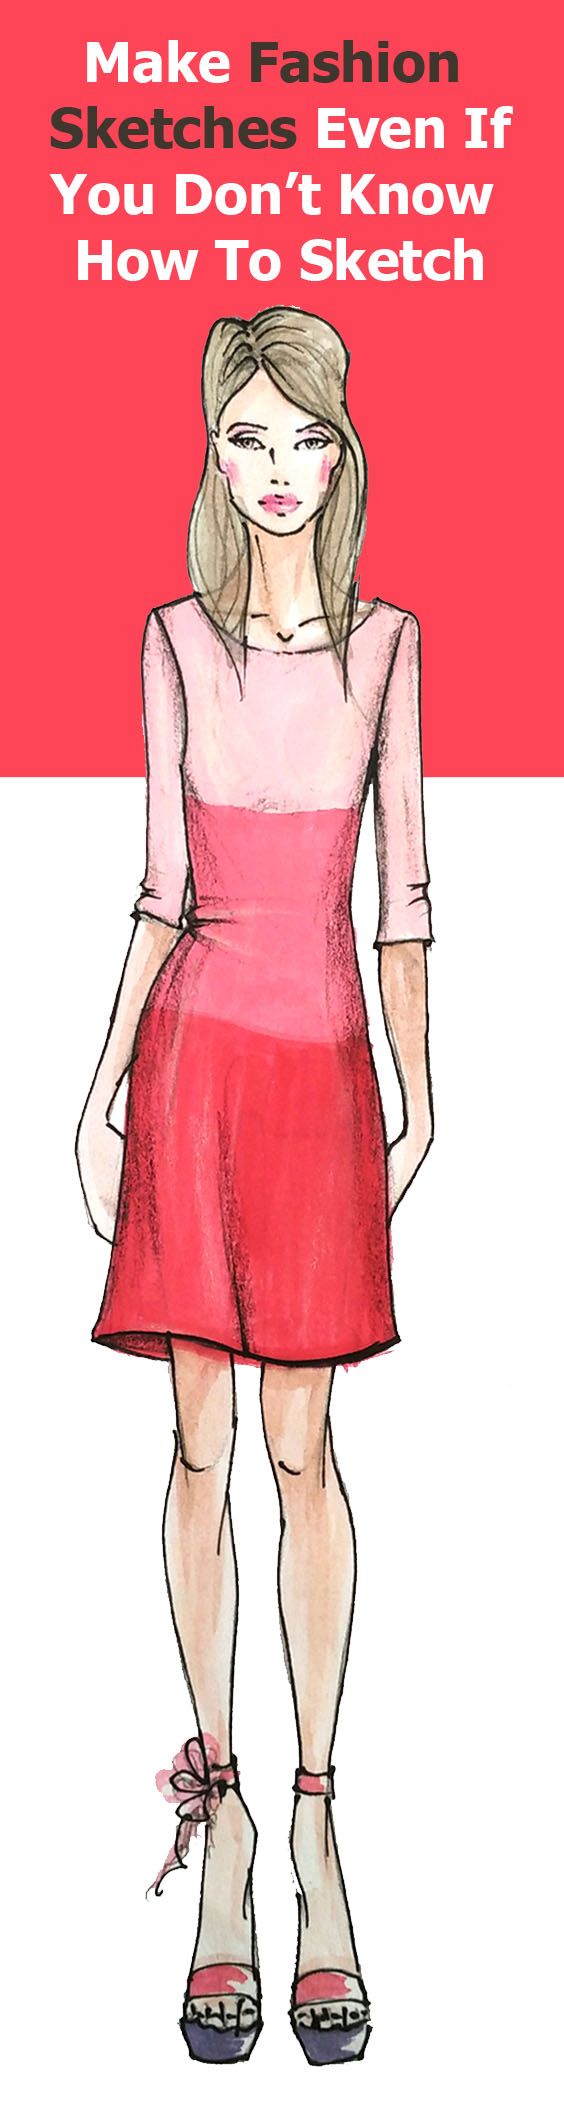 Lear how to make fashion design sketches step by step quickly with this fashion illustration tutorial and free fashion templates downloads. let's go!